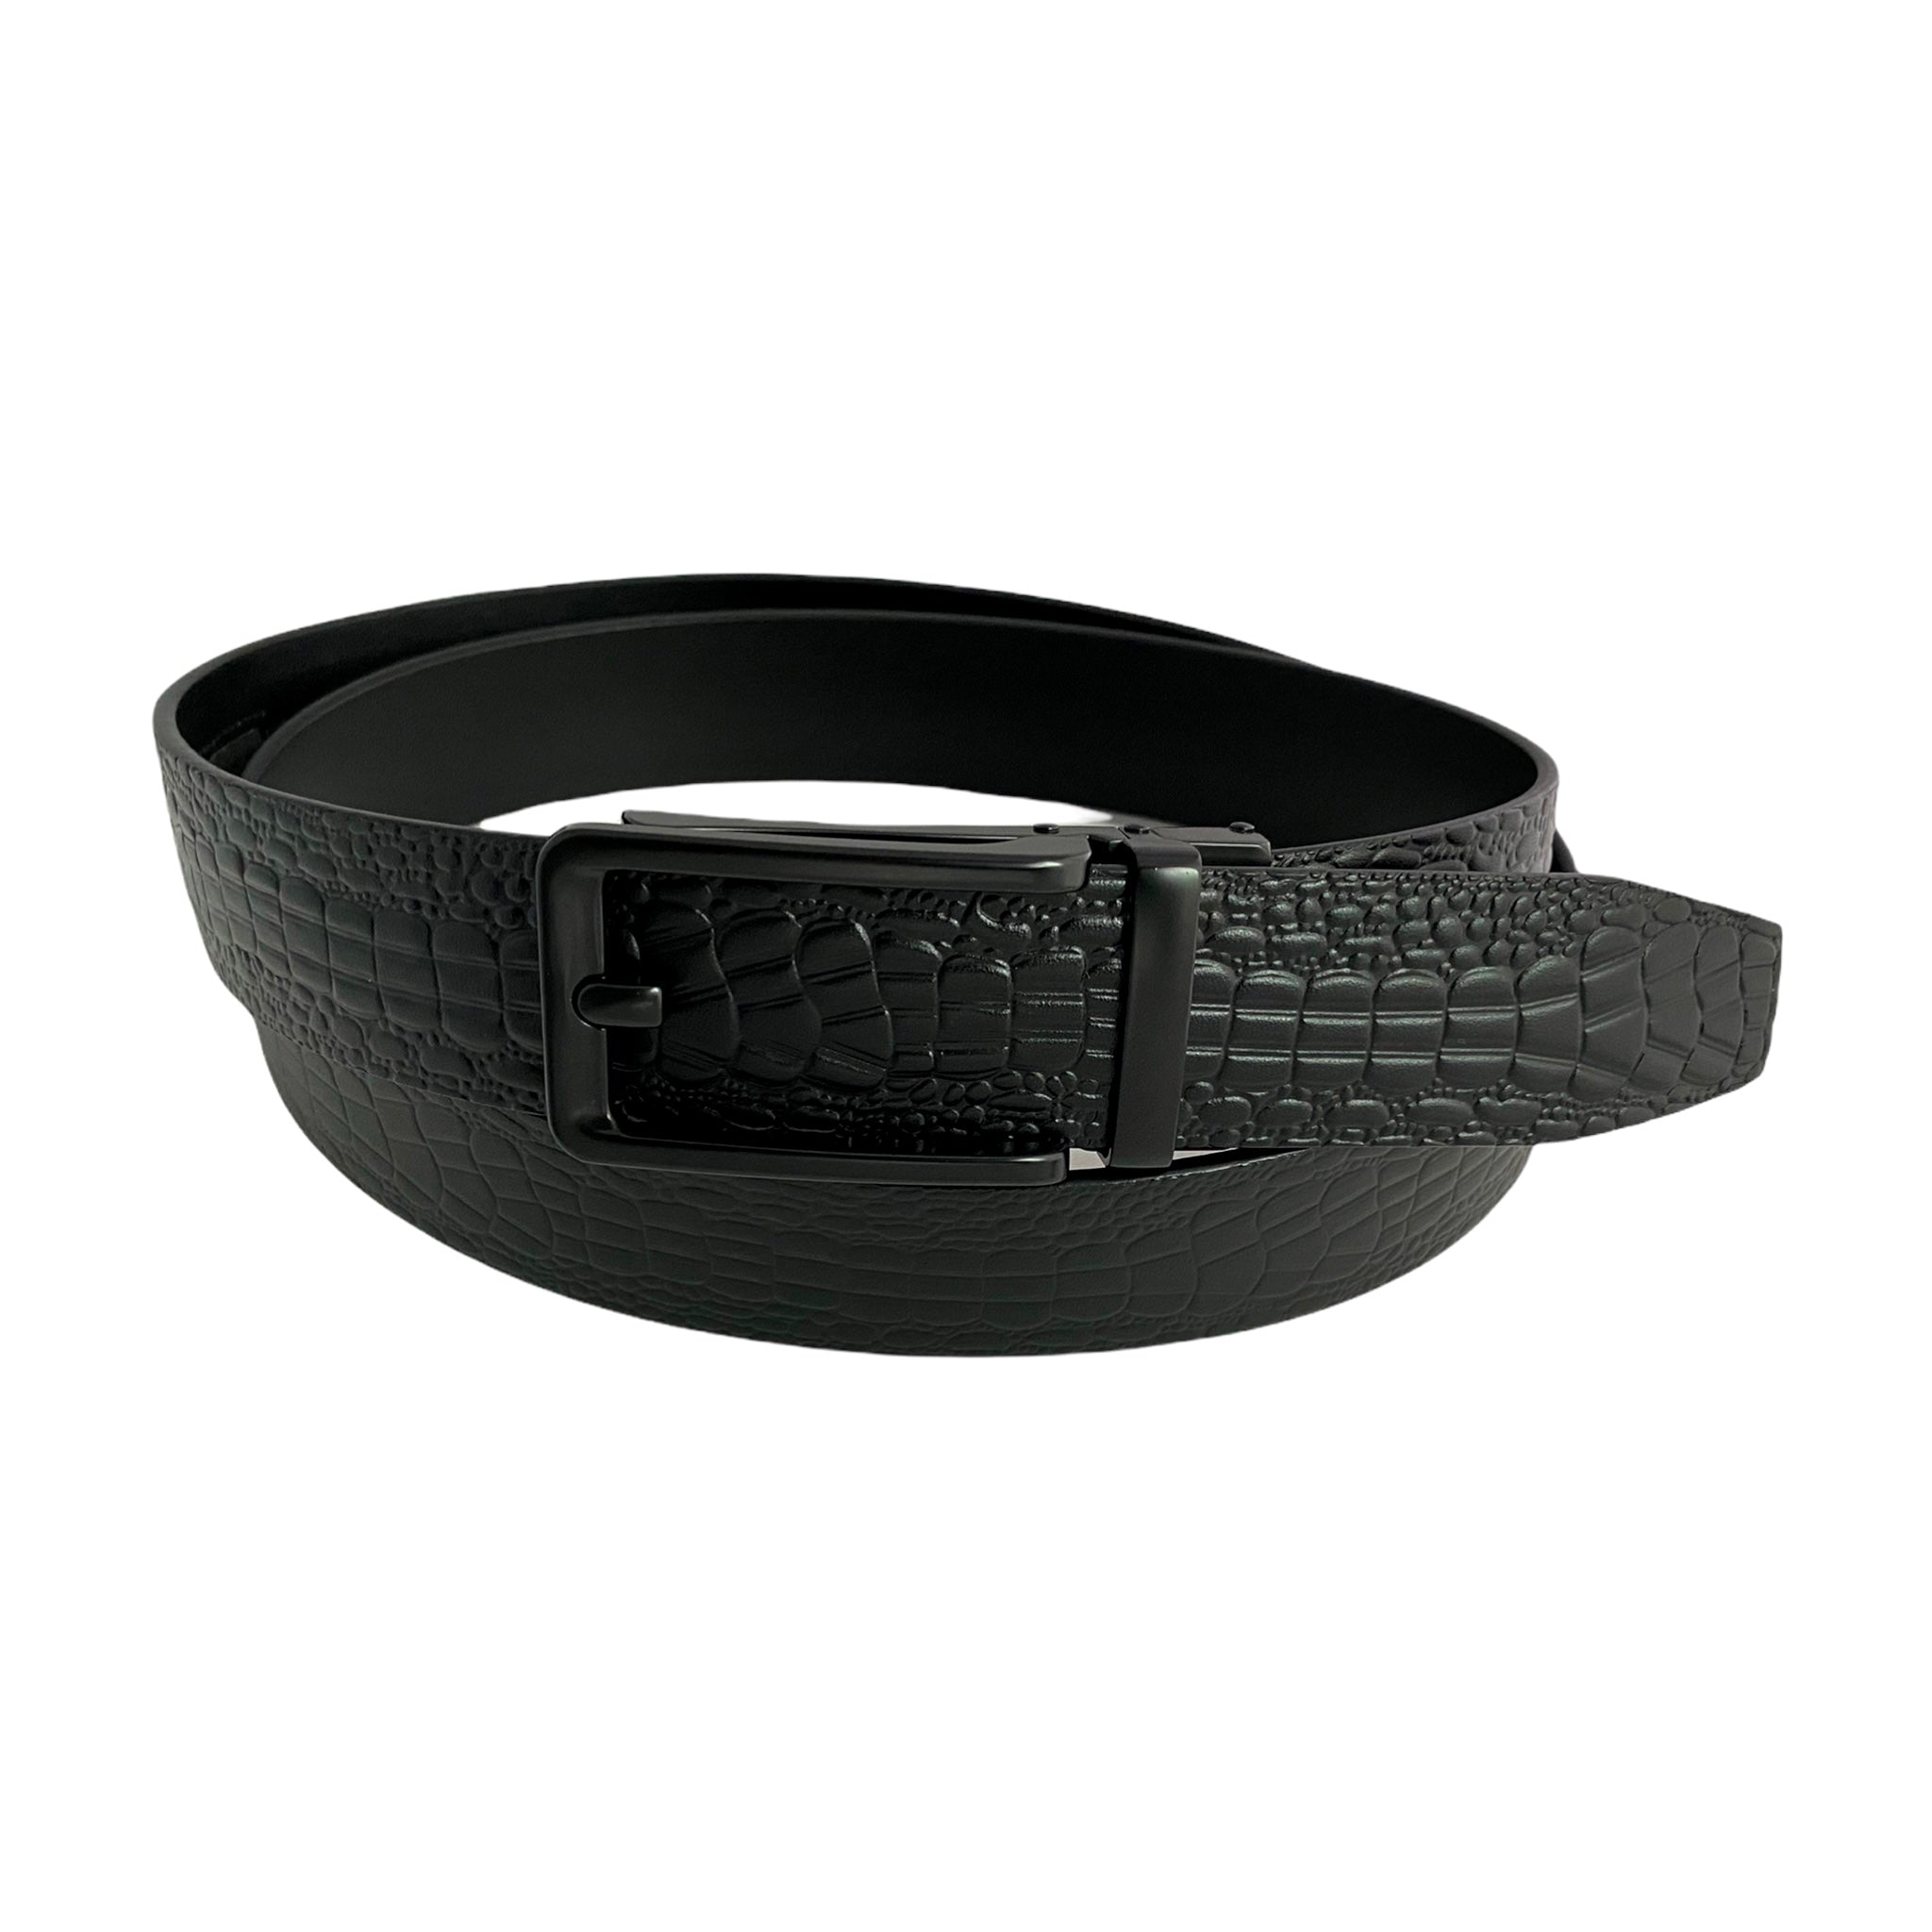 1.38" Genuine Leather Black Textured Strap And 1.38" Automatic Buckle Black Hollow